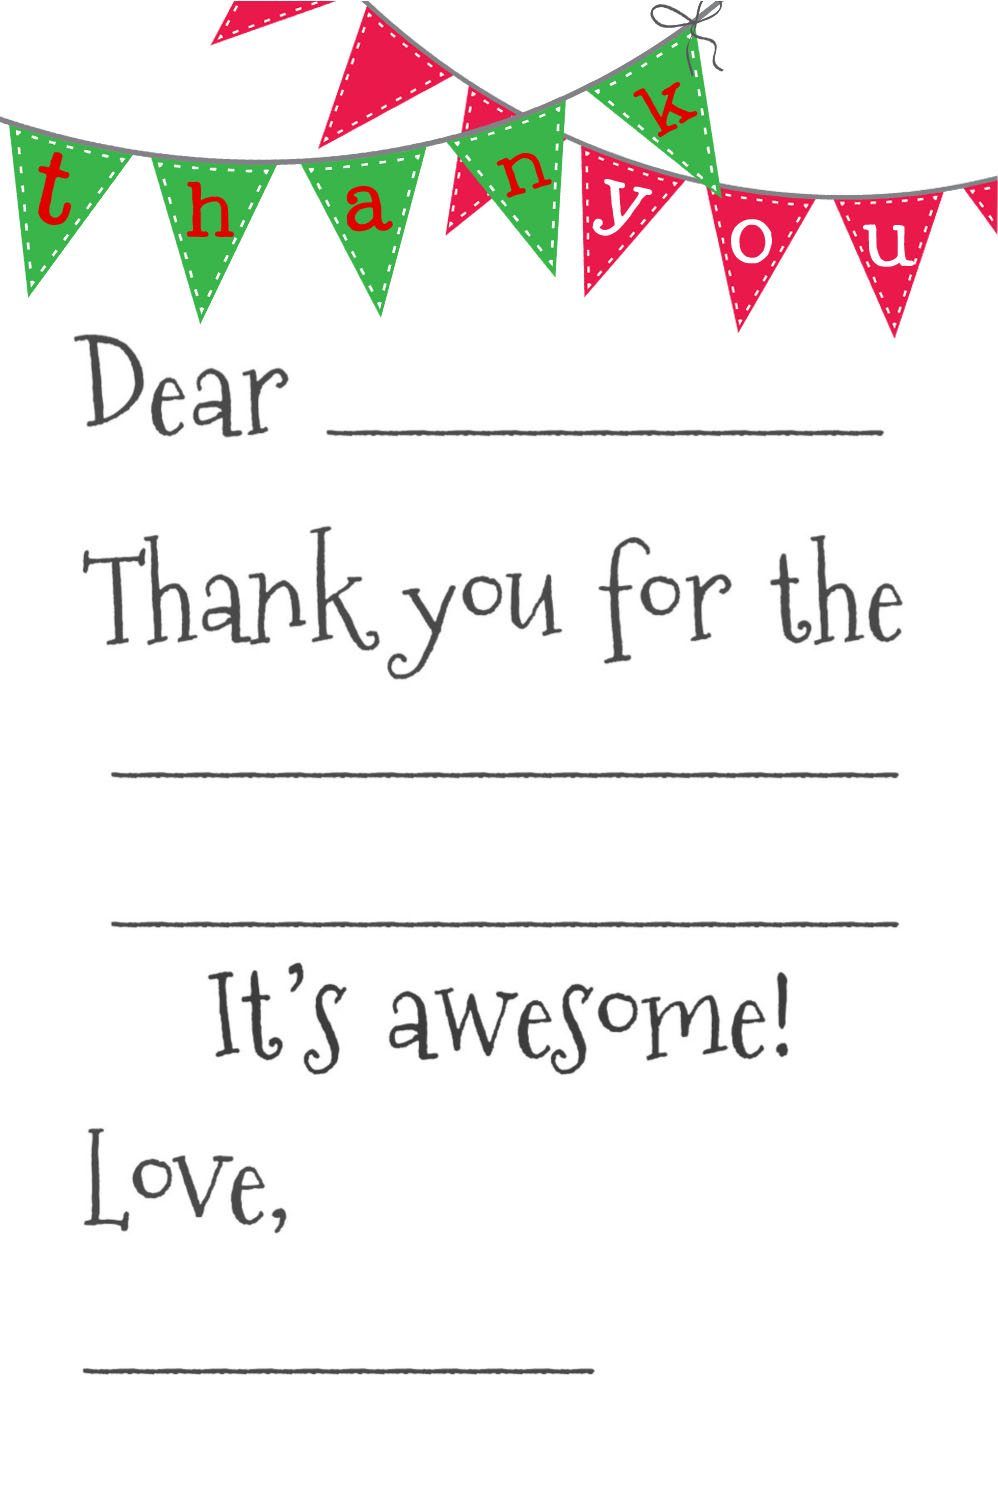 toddler-thank-you-cards-thank-you-cards-cards-writing-thank-you-cards